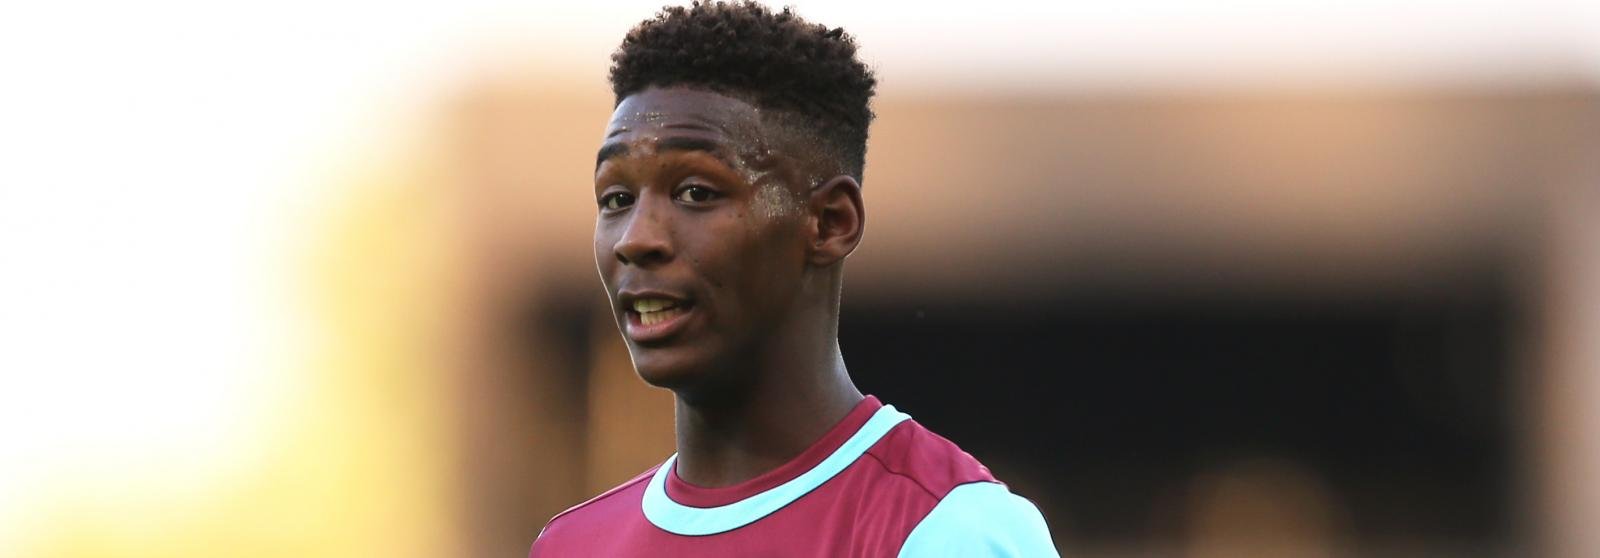 Manchester United and Manchester City quoted £18m for West Ham United starlet